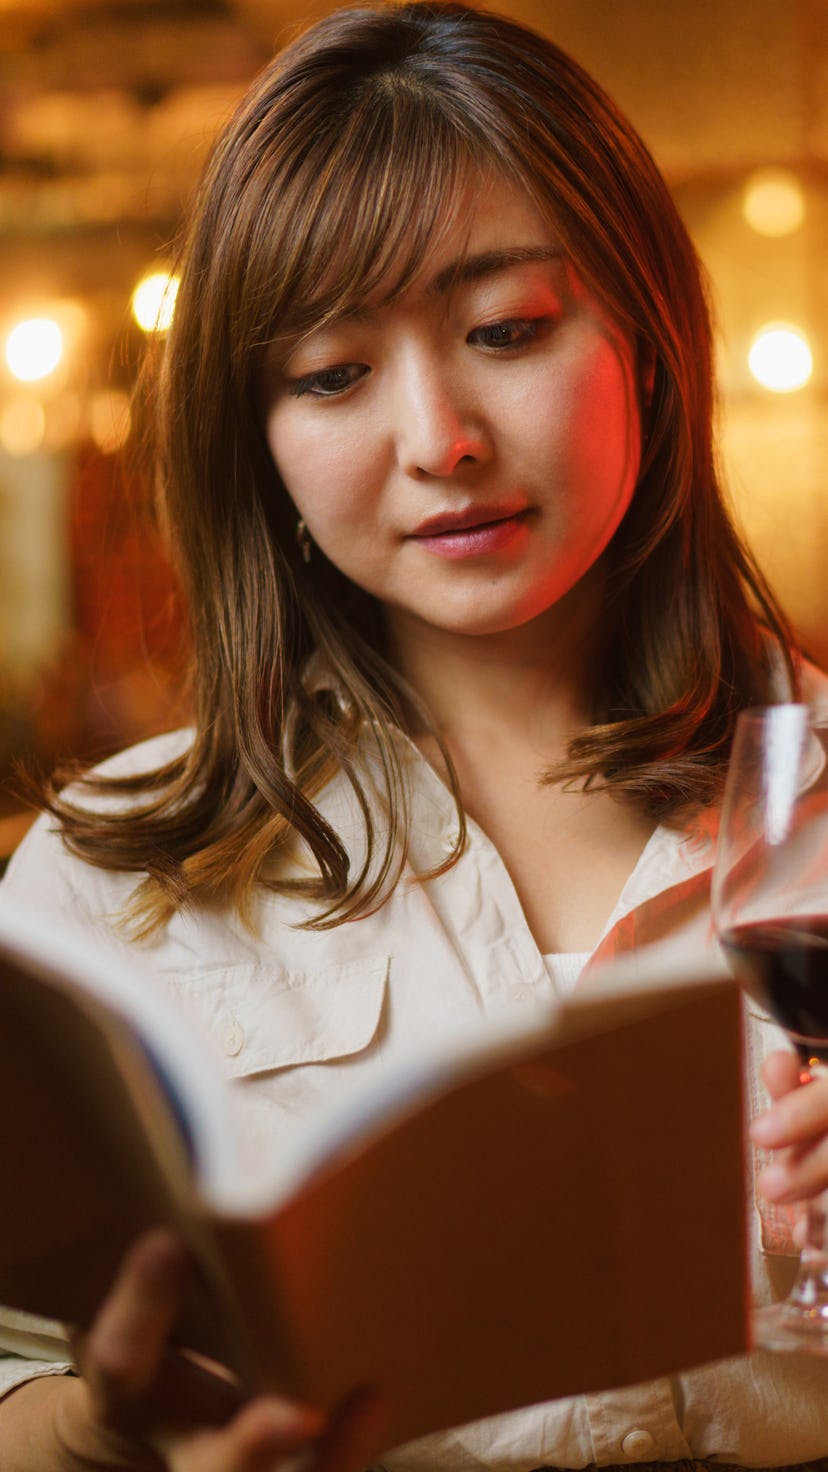 A woman is enjoying reading a book and drinking red wine in a cozy comfortable  cafe & bar at night.